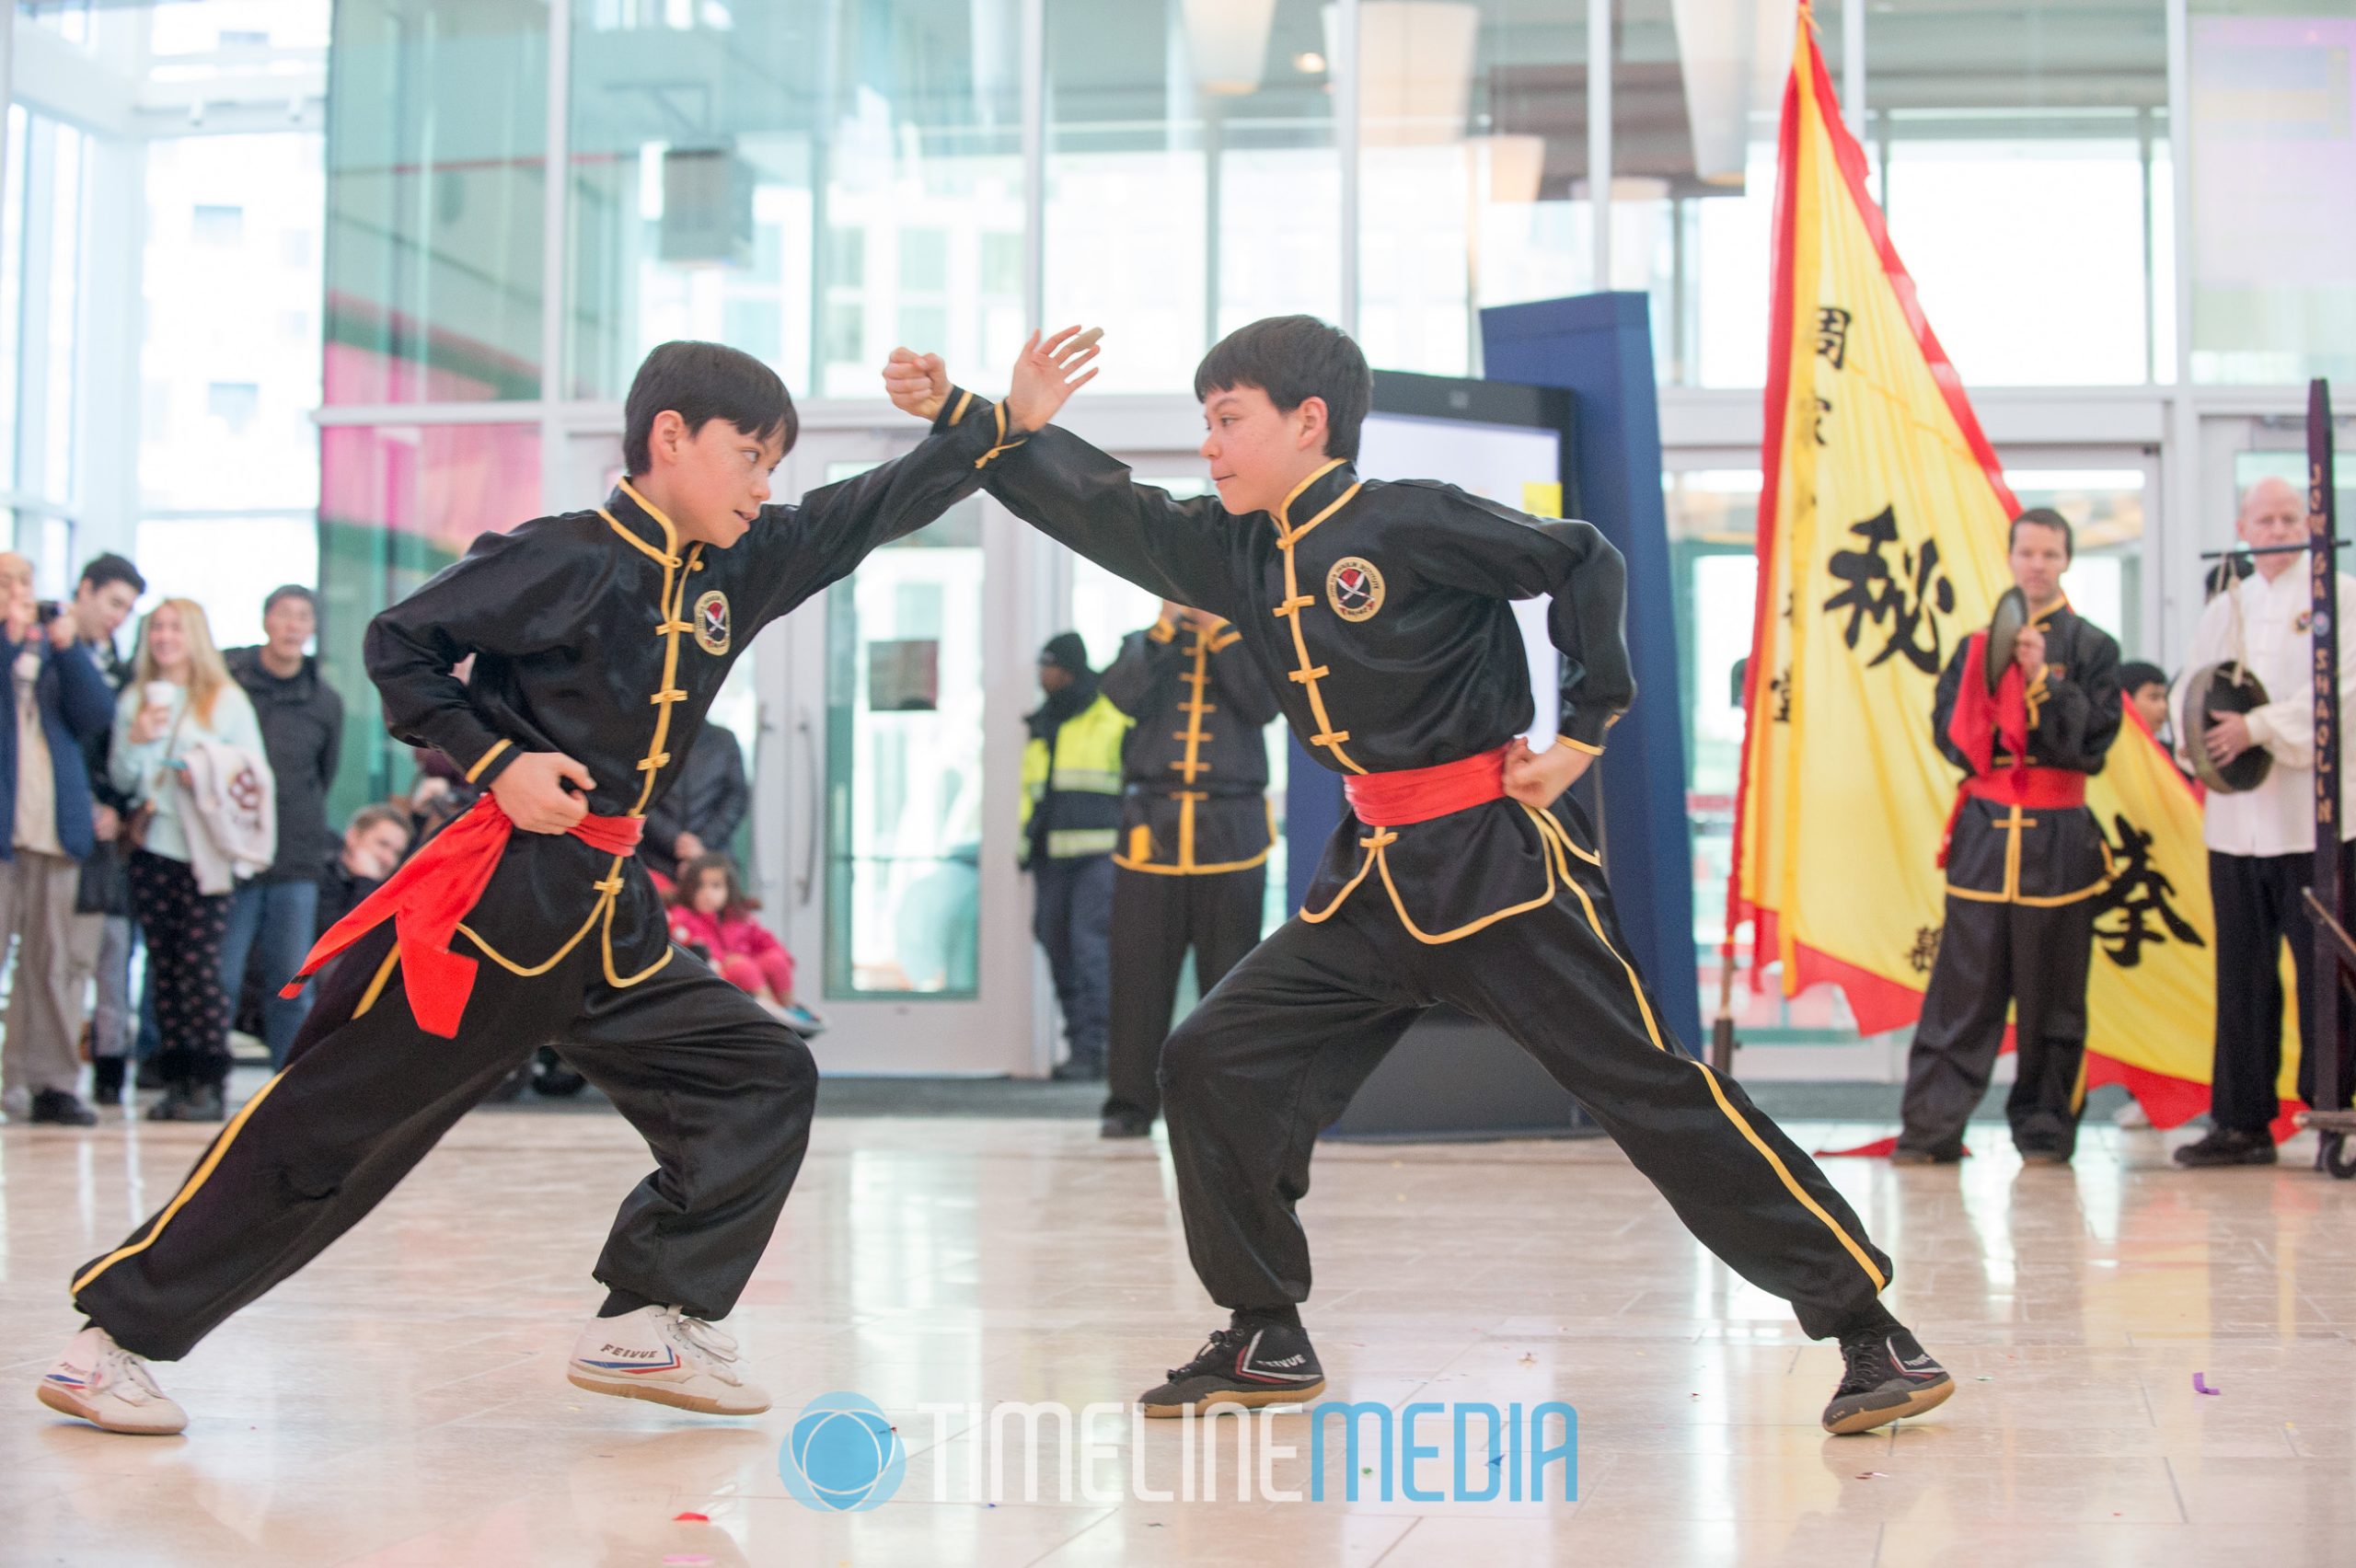 Martial artists performing at Tysons Corner Center Concourse ©TimeLine Media